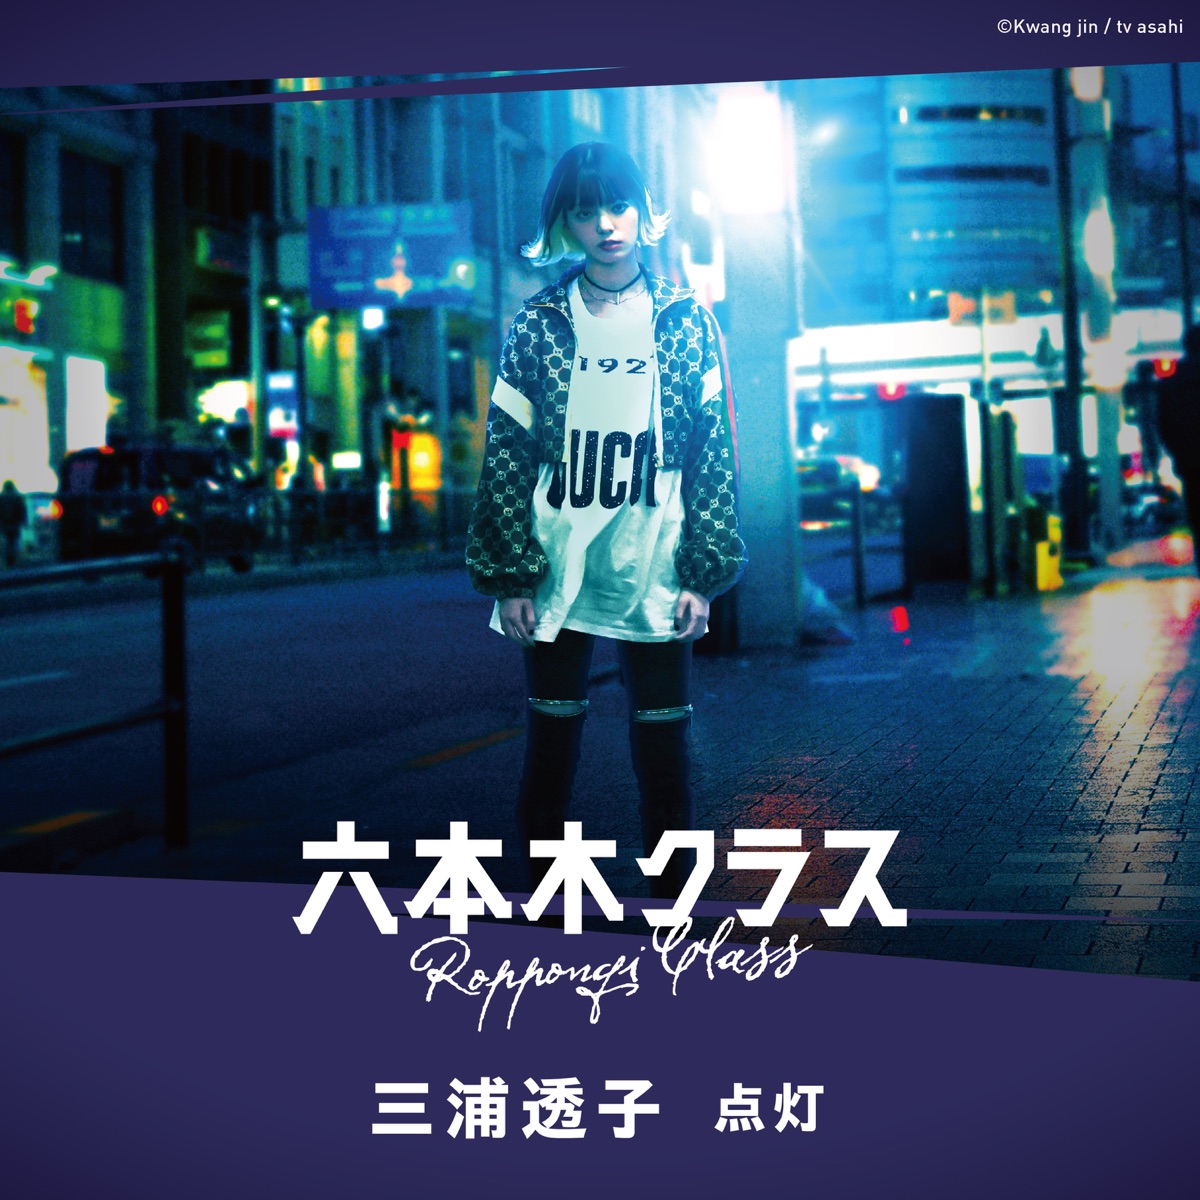 Cover art for『Toko Miura - 点灯』from the release『Tentou